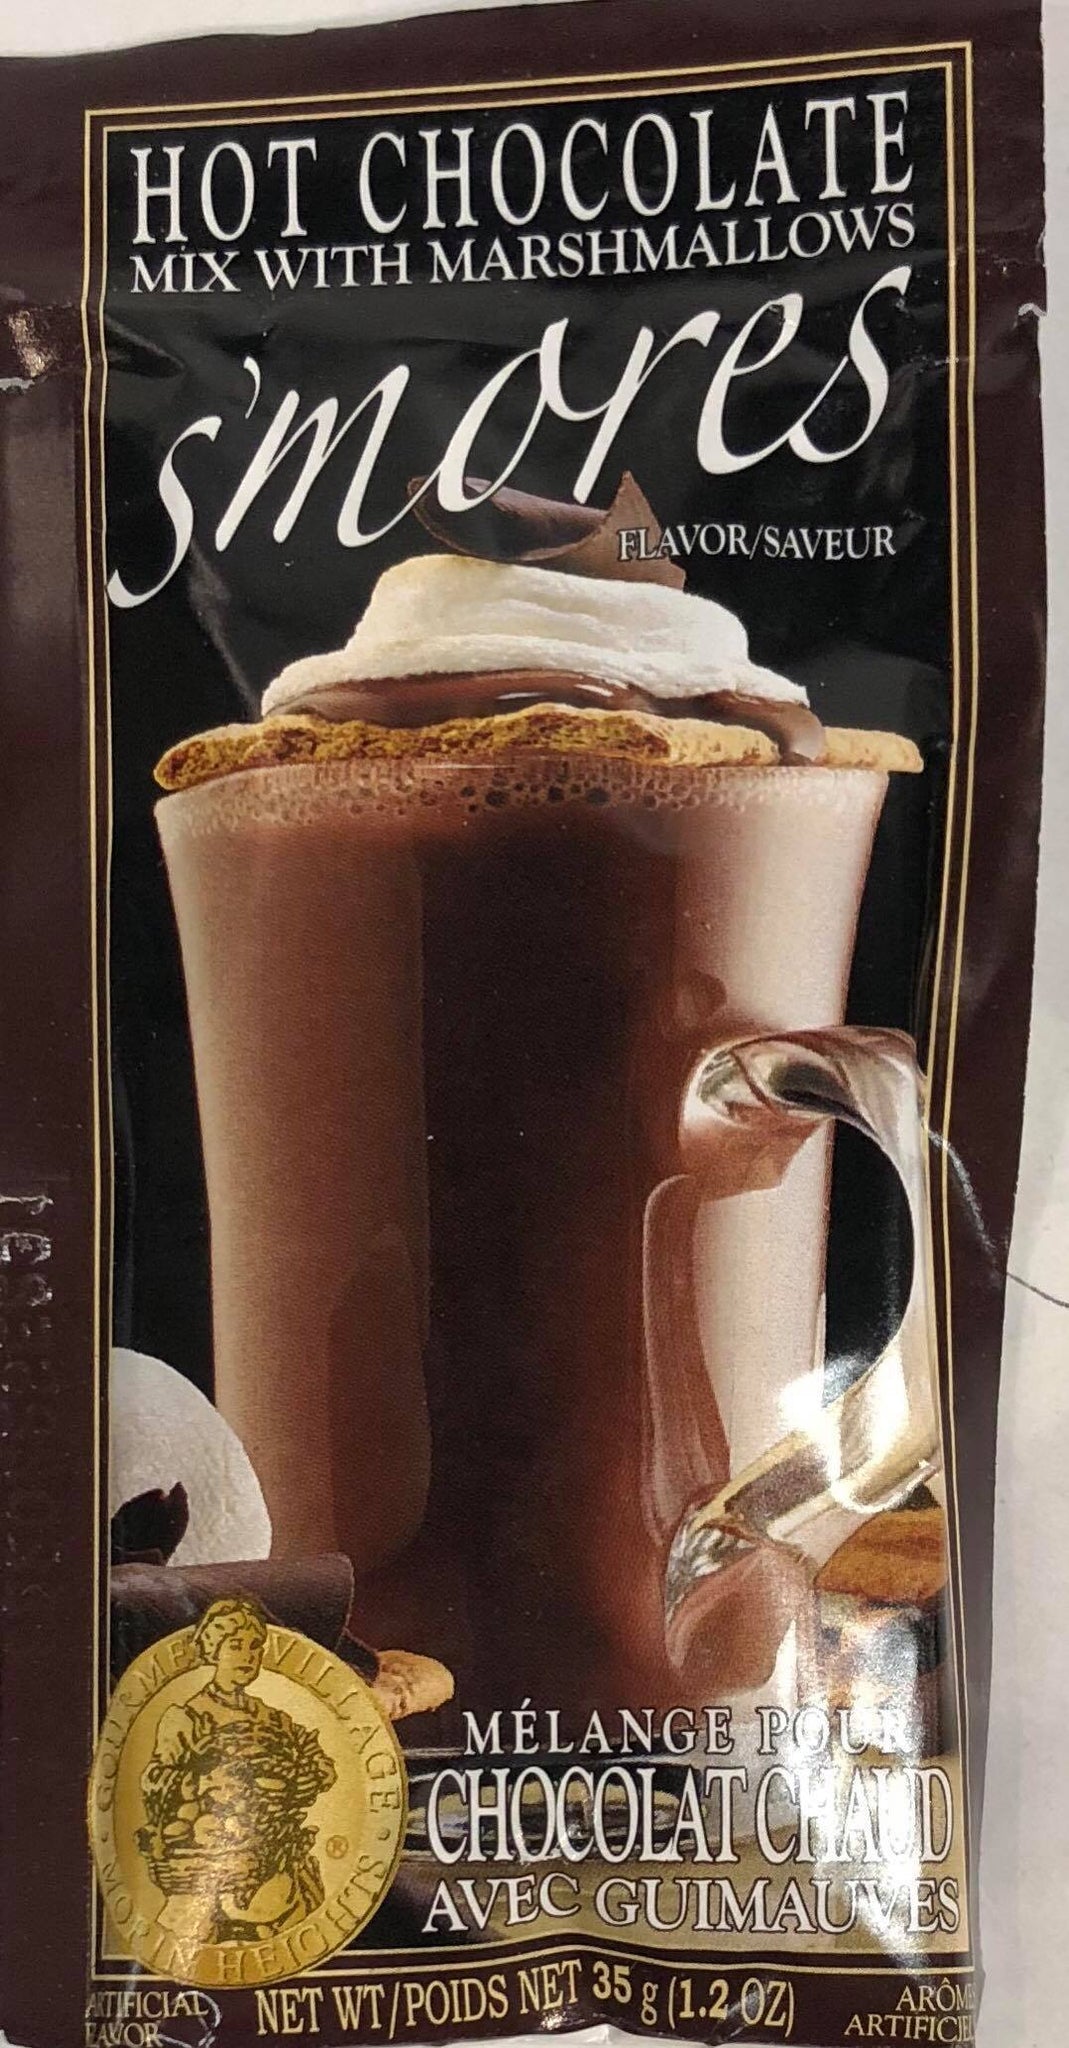 Gourmet Village "S'more" Hot Chocolate Mix